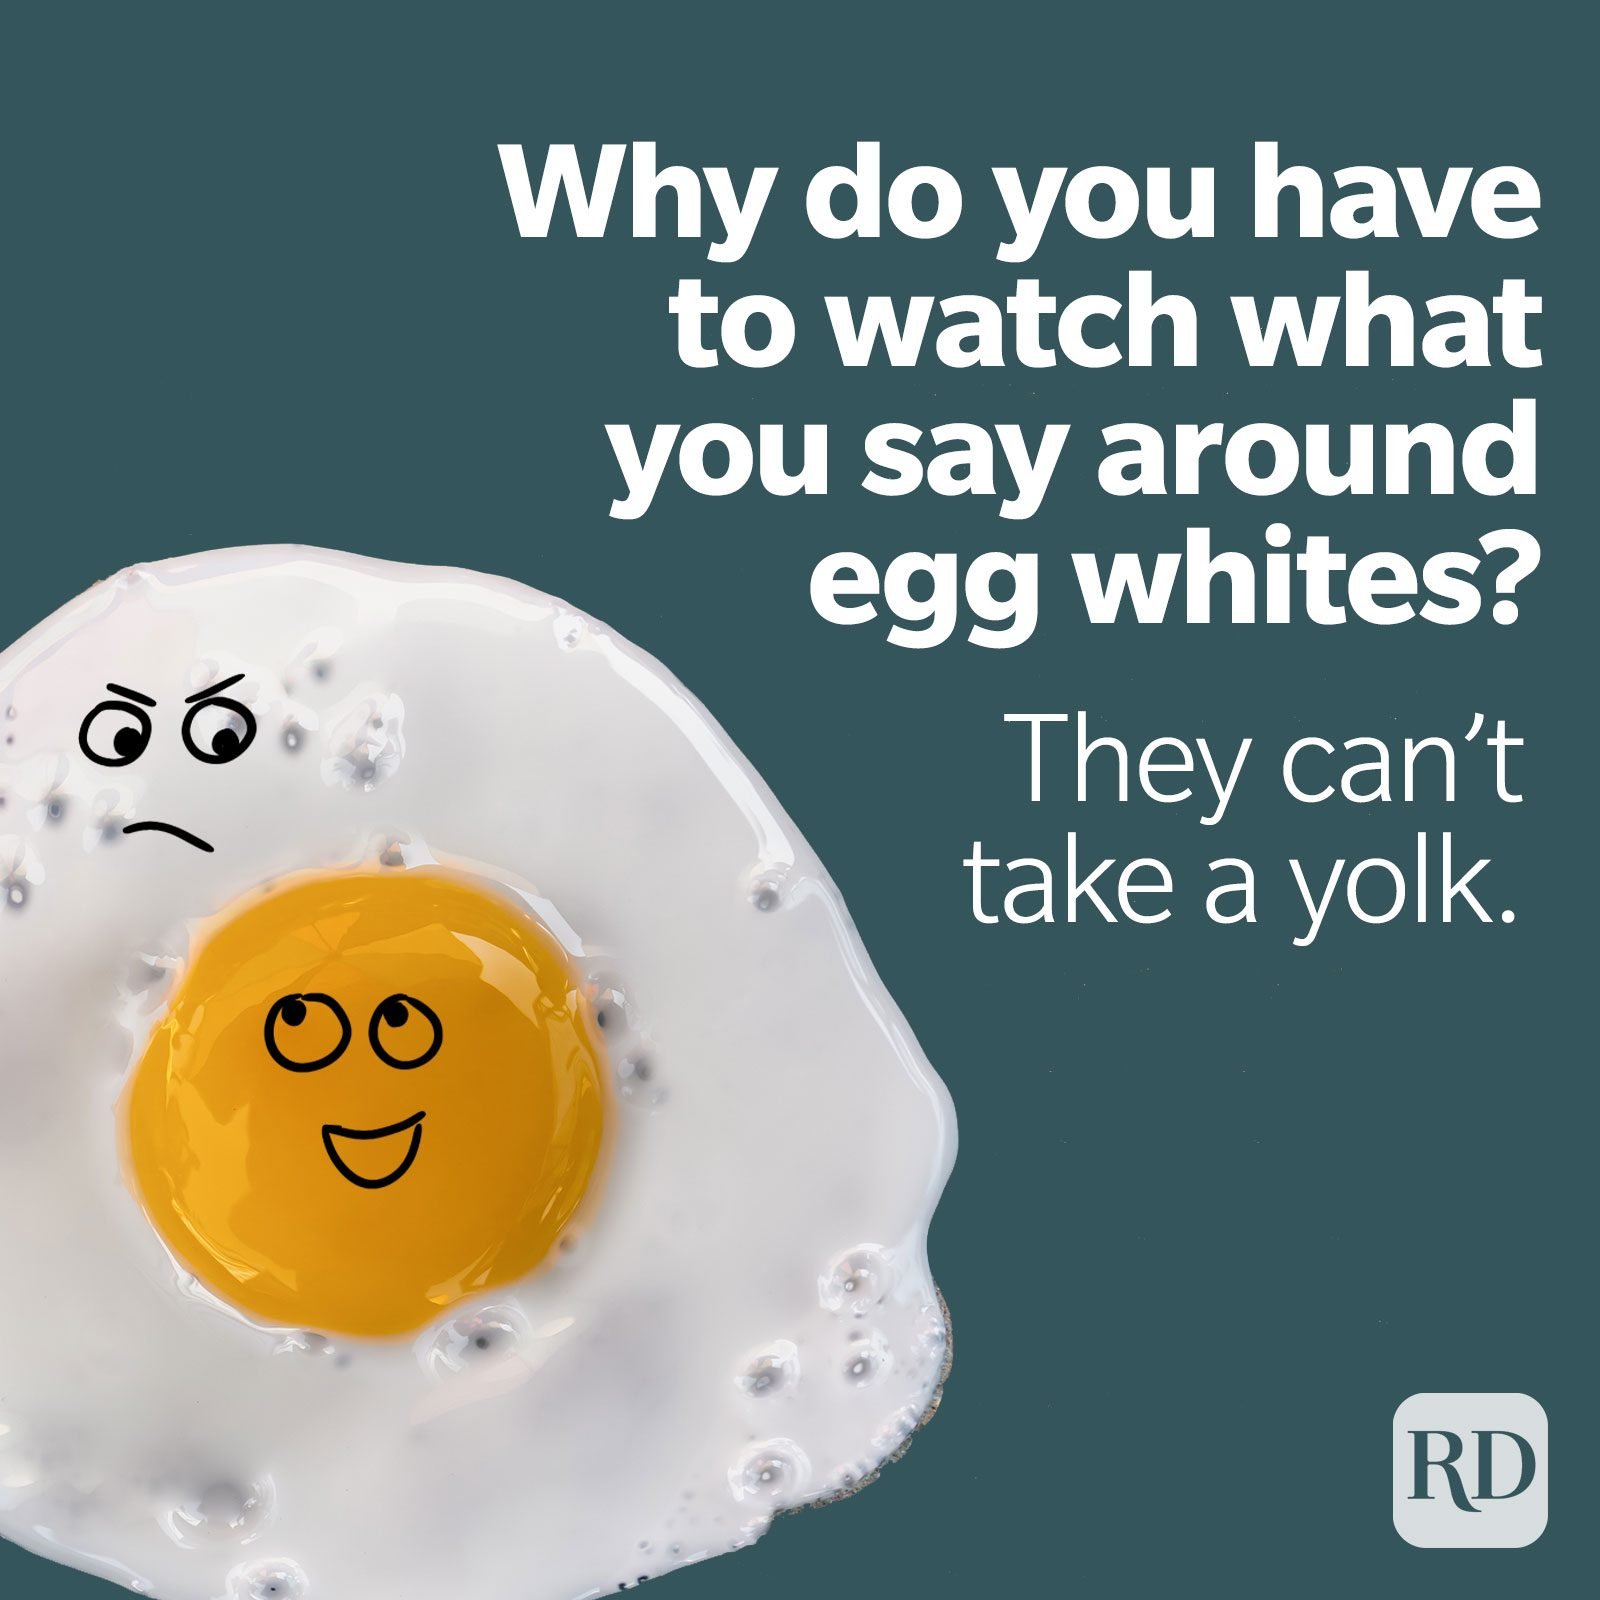 Why do you have to watch what you say around egg whites? They can't take a yolk.